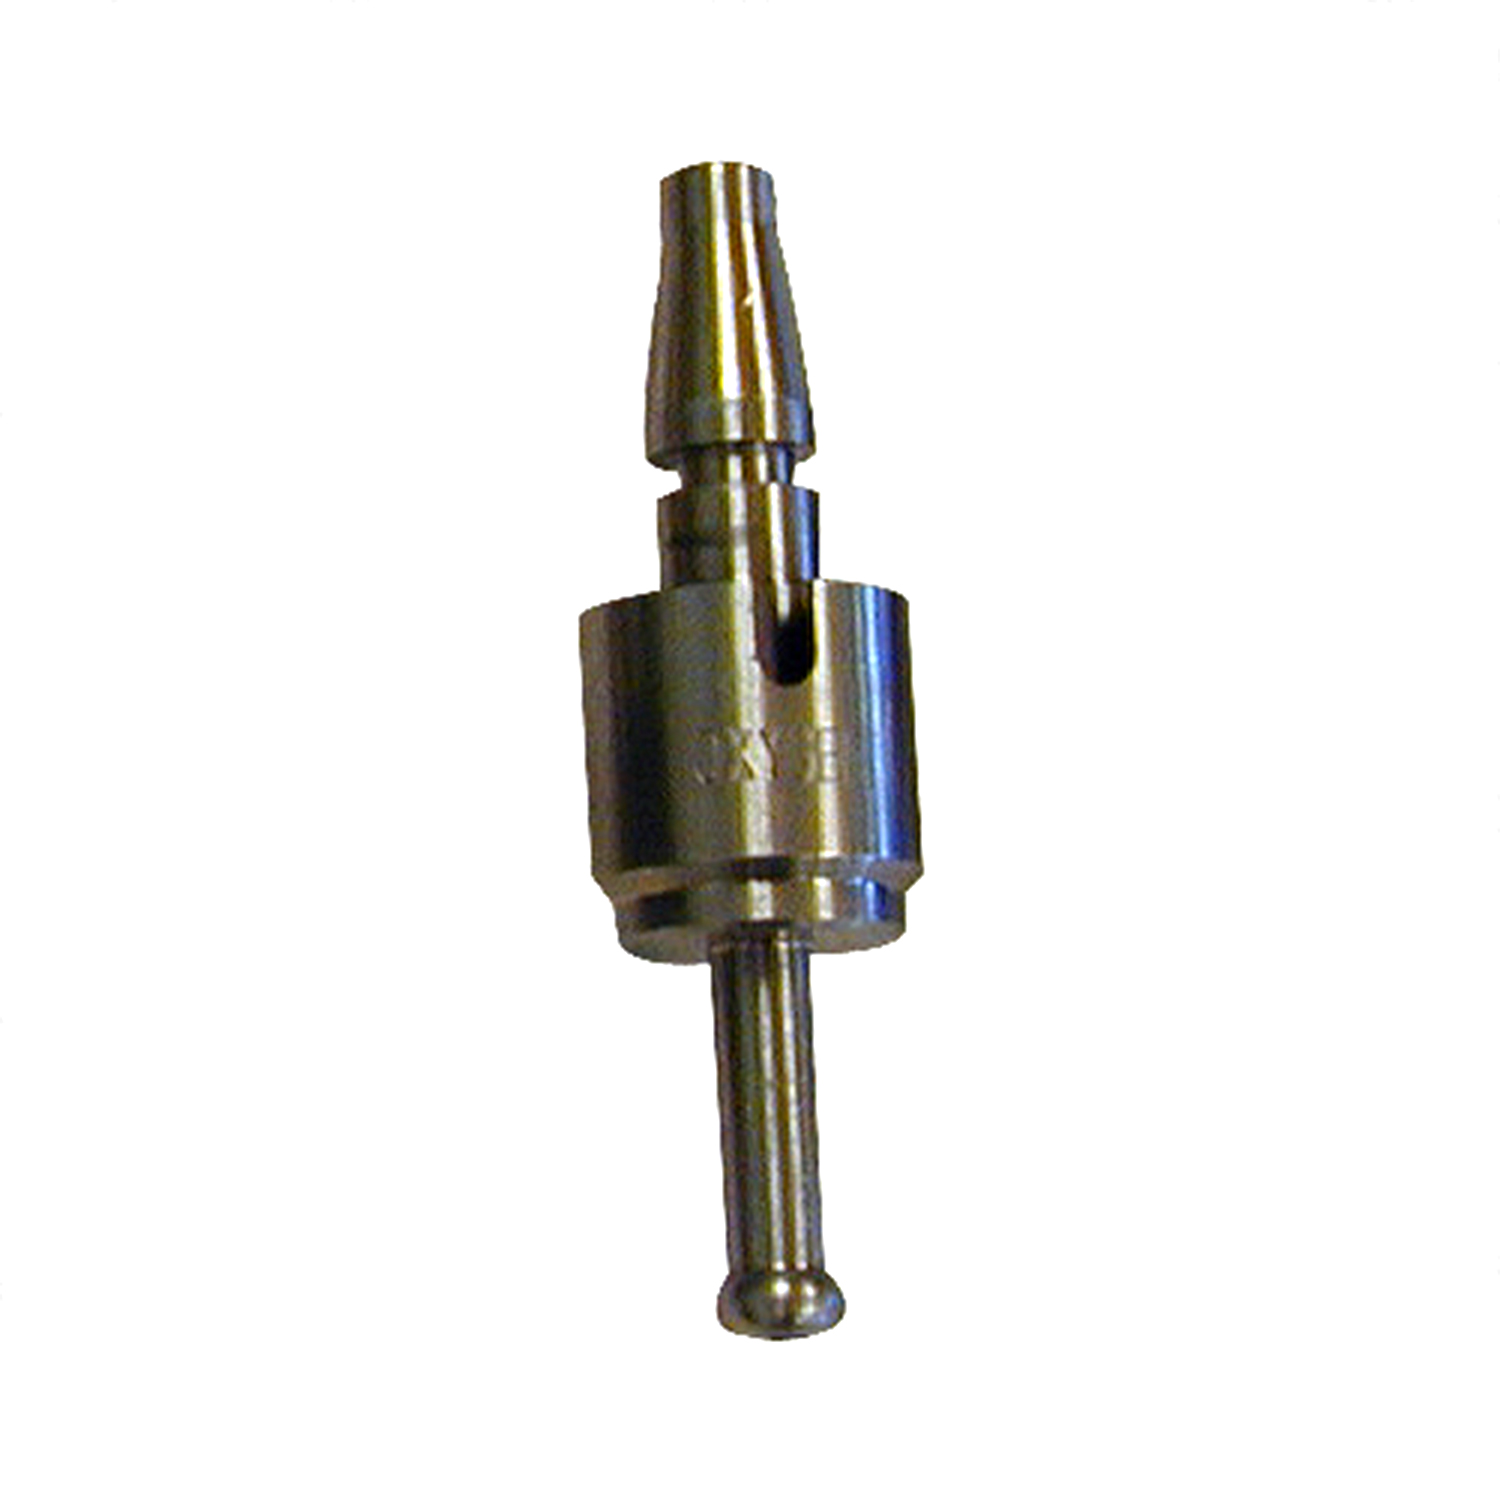 Accessory: Schrader-style 1/4" male swivel fitting for oxygen hose